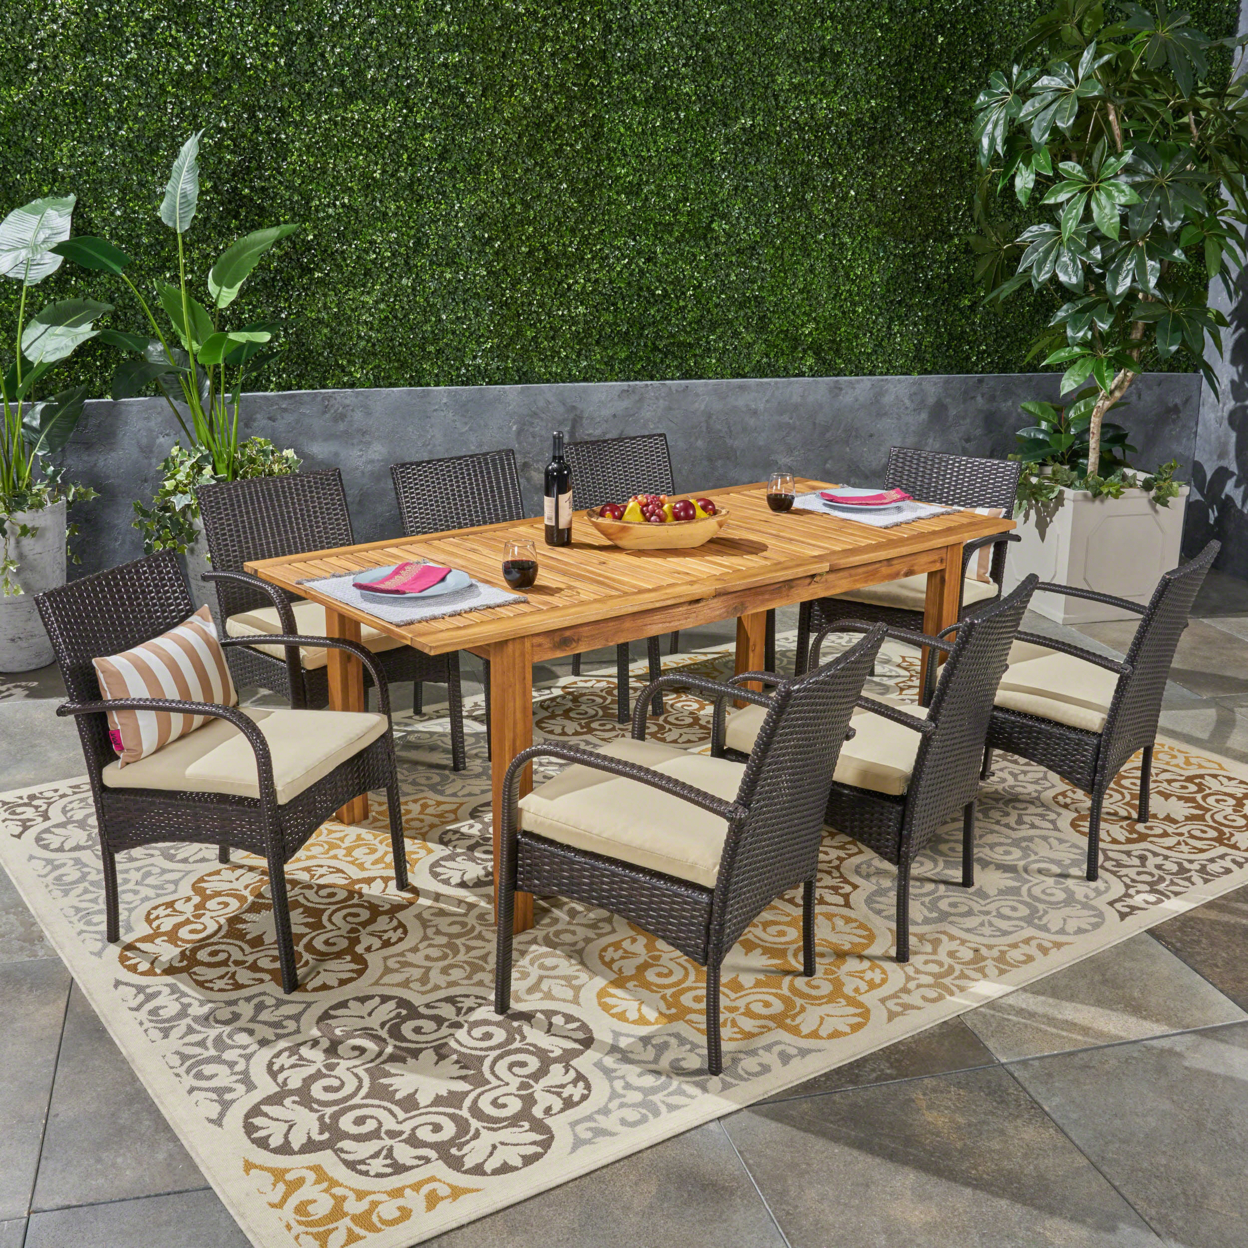 Elis Outdoor 7 Piece Wood And Wicker Expandable Dining Set - Natural + Brown Wicker, Set Of 7